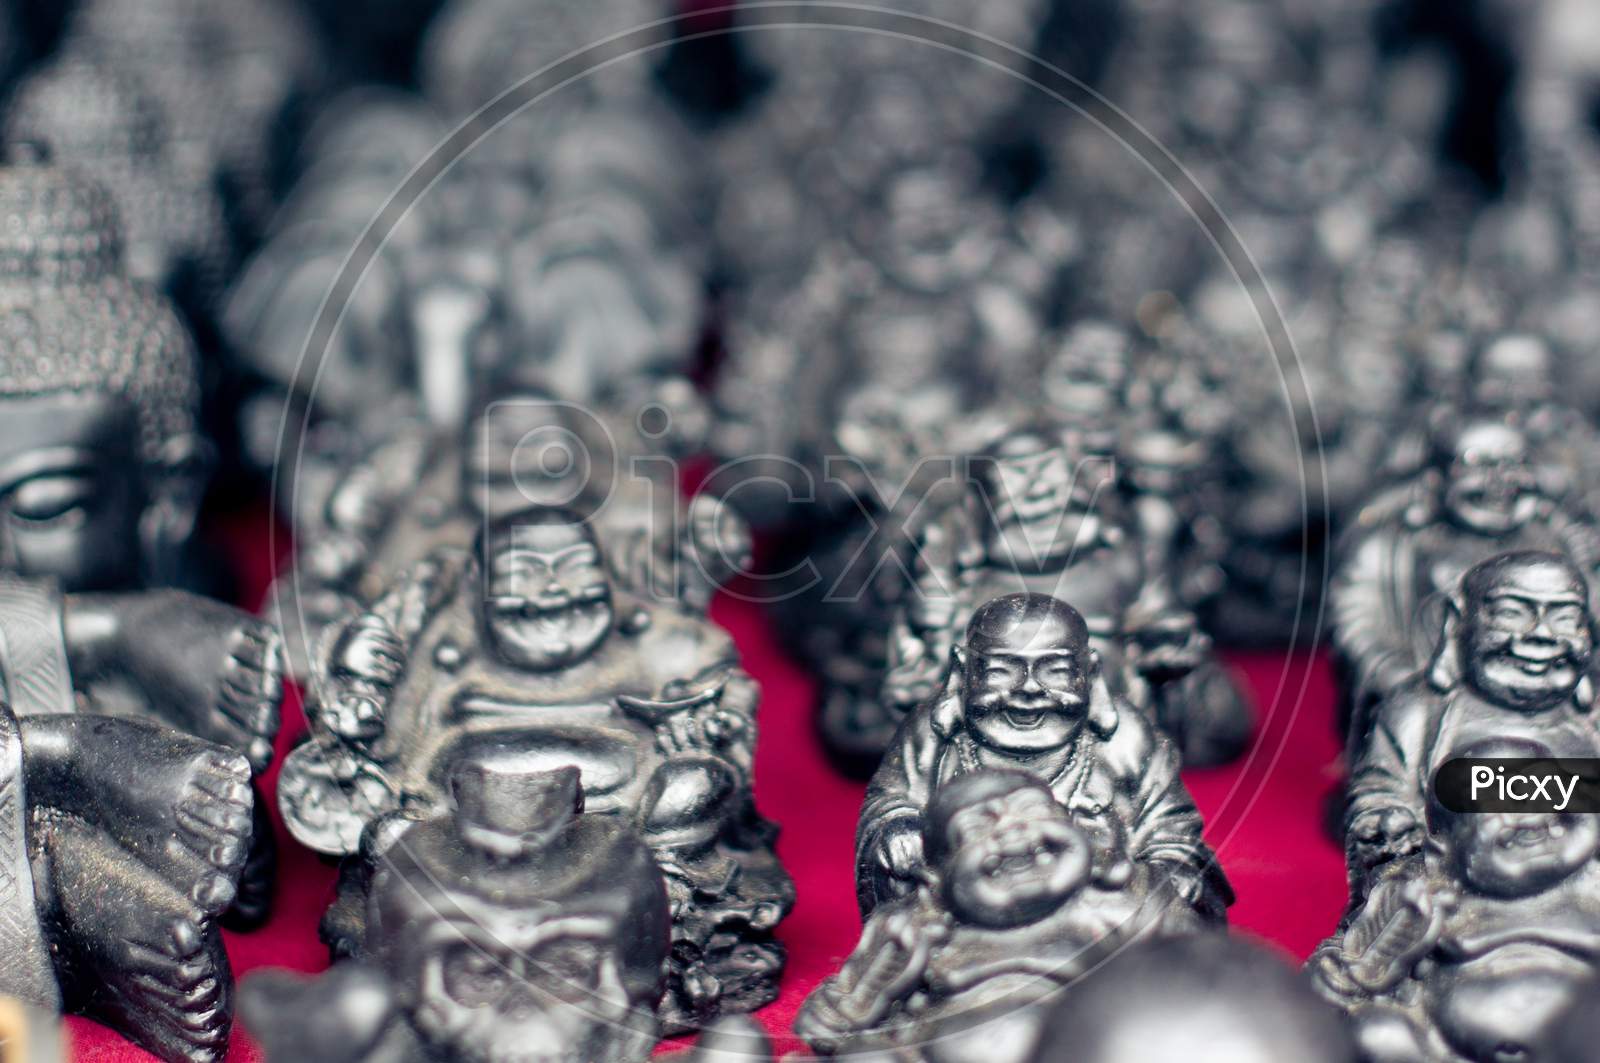 Silver Bhudda Statues Placed On A Red Mat In In An Open Shop Ready To Sell Near A Monastry In Bhutan, Mcleodganj, Dharamshala, Nepal And More Tourist Places In India